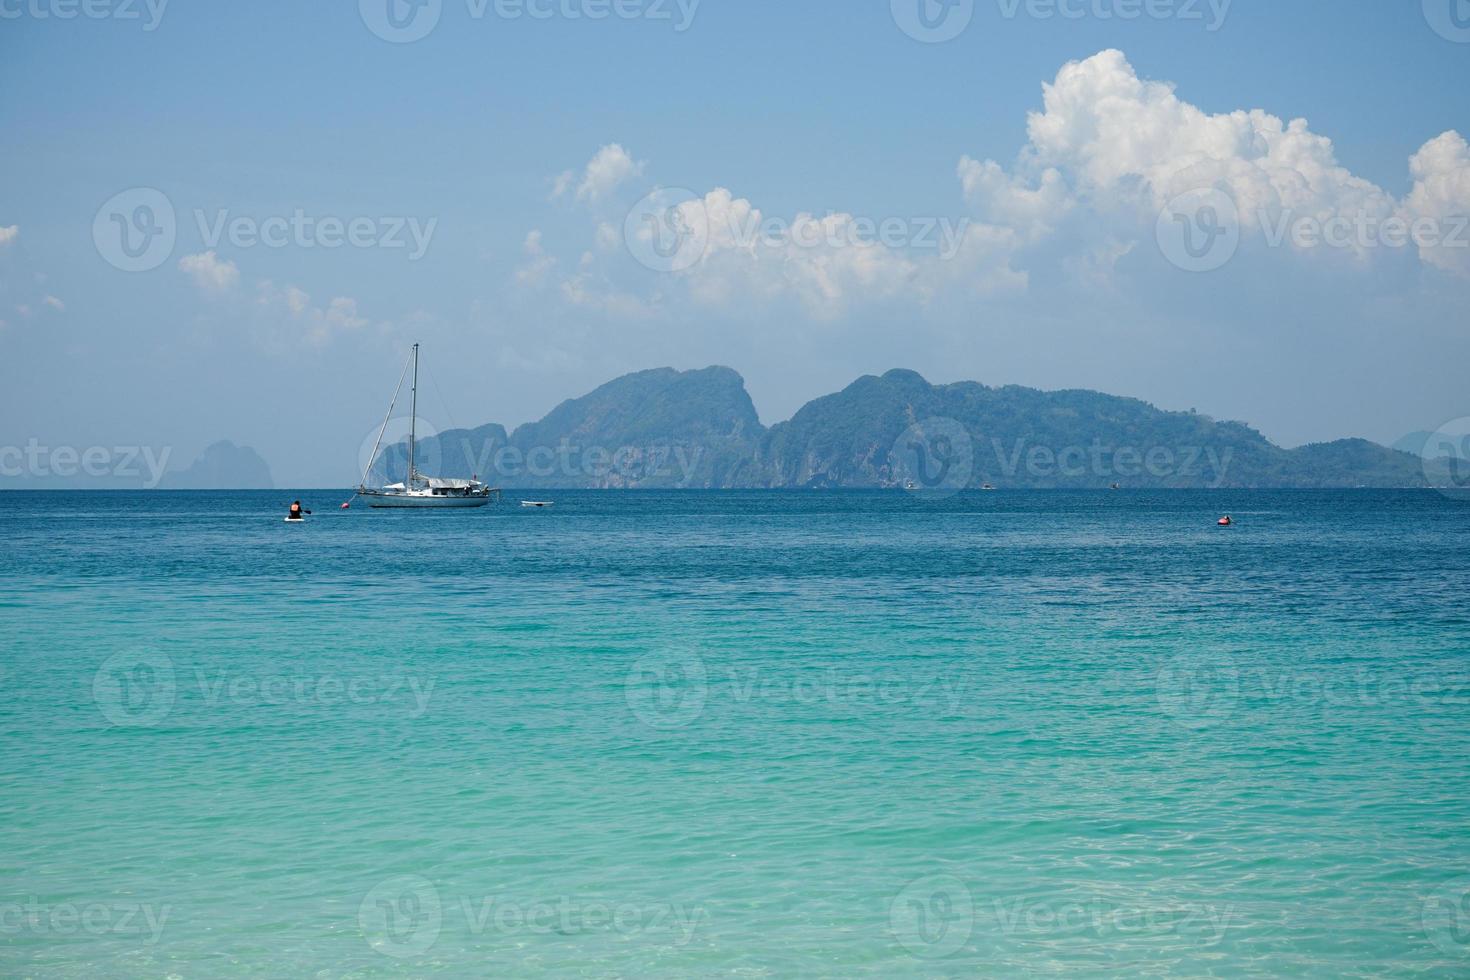 The yacht parking in the calm sea with moving paddle boat and mountain with blue sky in background photo